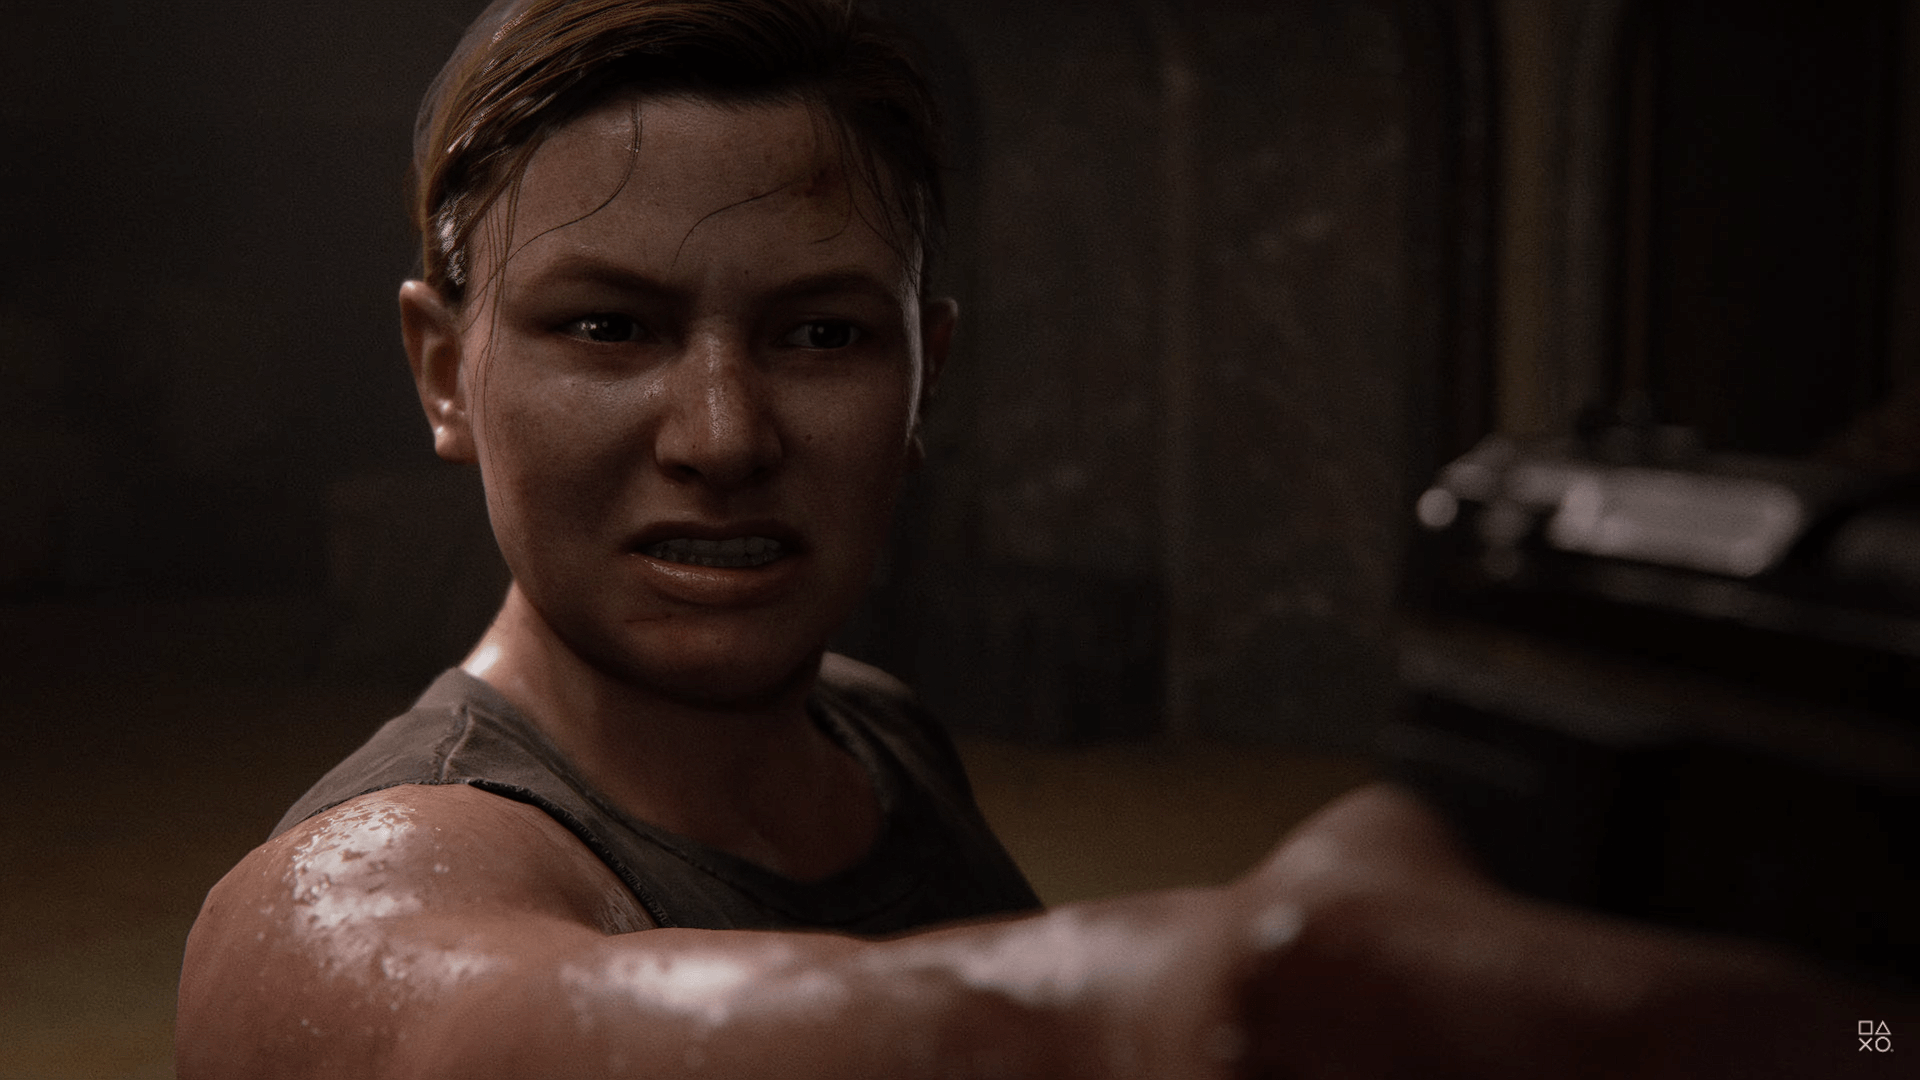 ‘The Last of Us Part II’ dominates with 7 wins at The Game Awards 2020